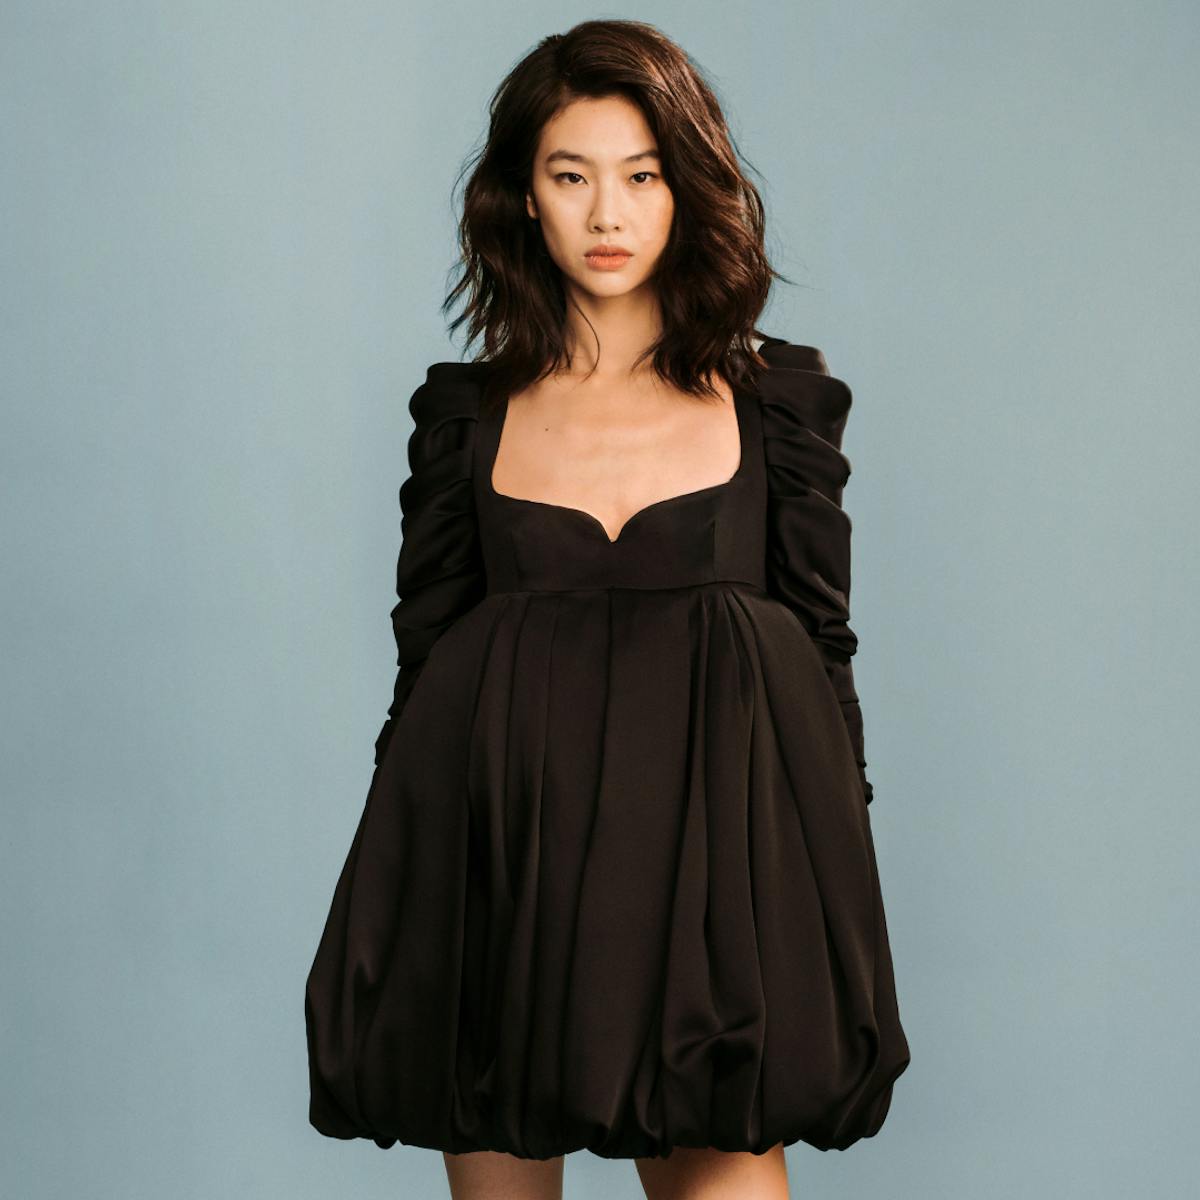 Jung Ho-yeon wears a black, short balloon dress and black boots, standing against a blue-gray background.